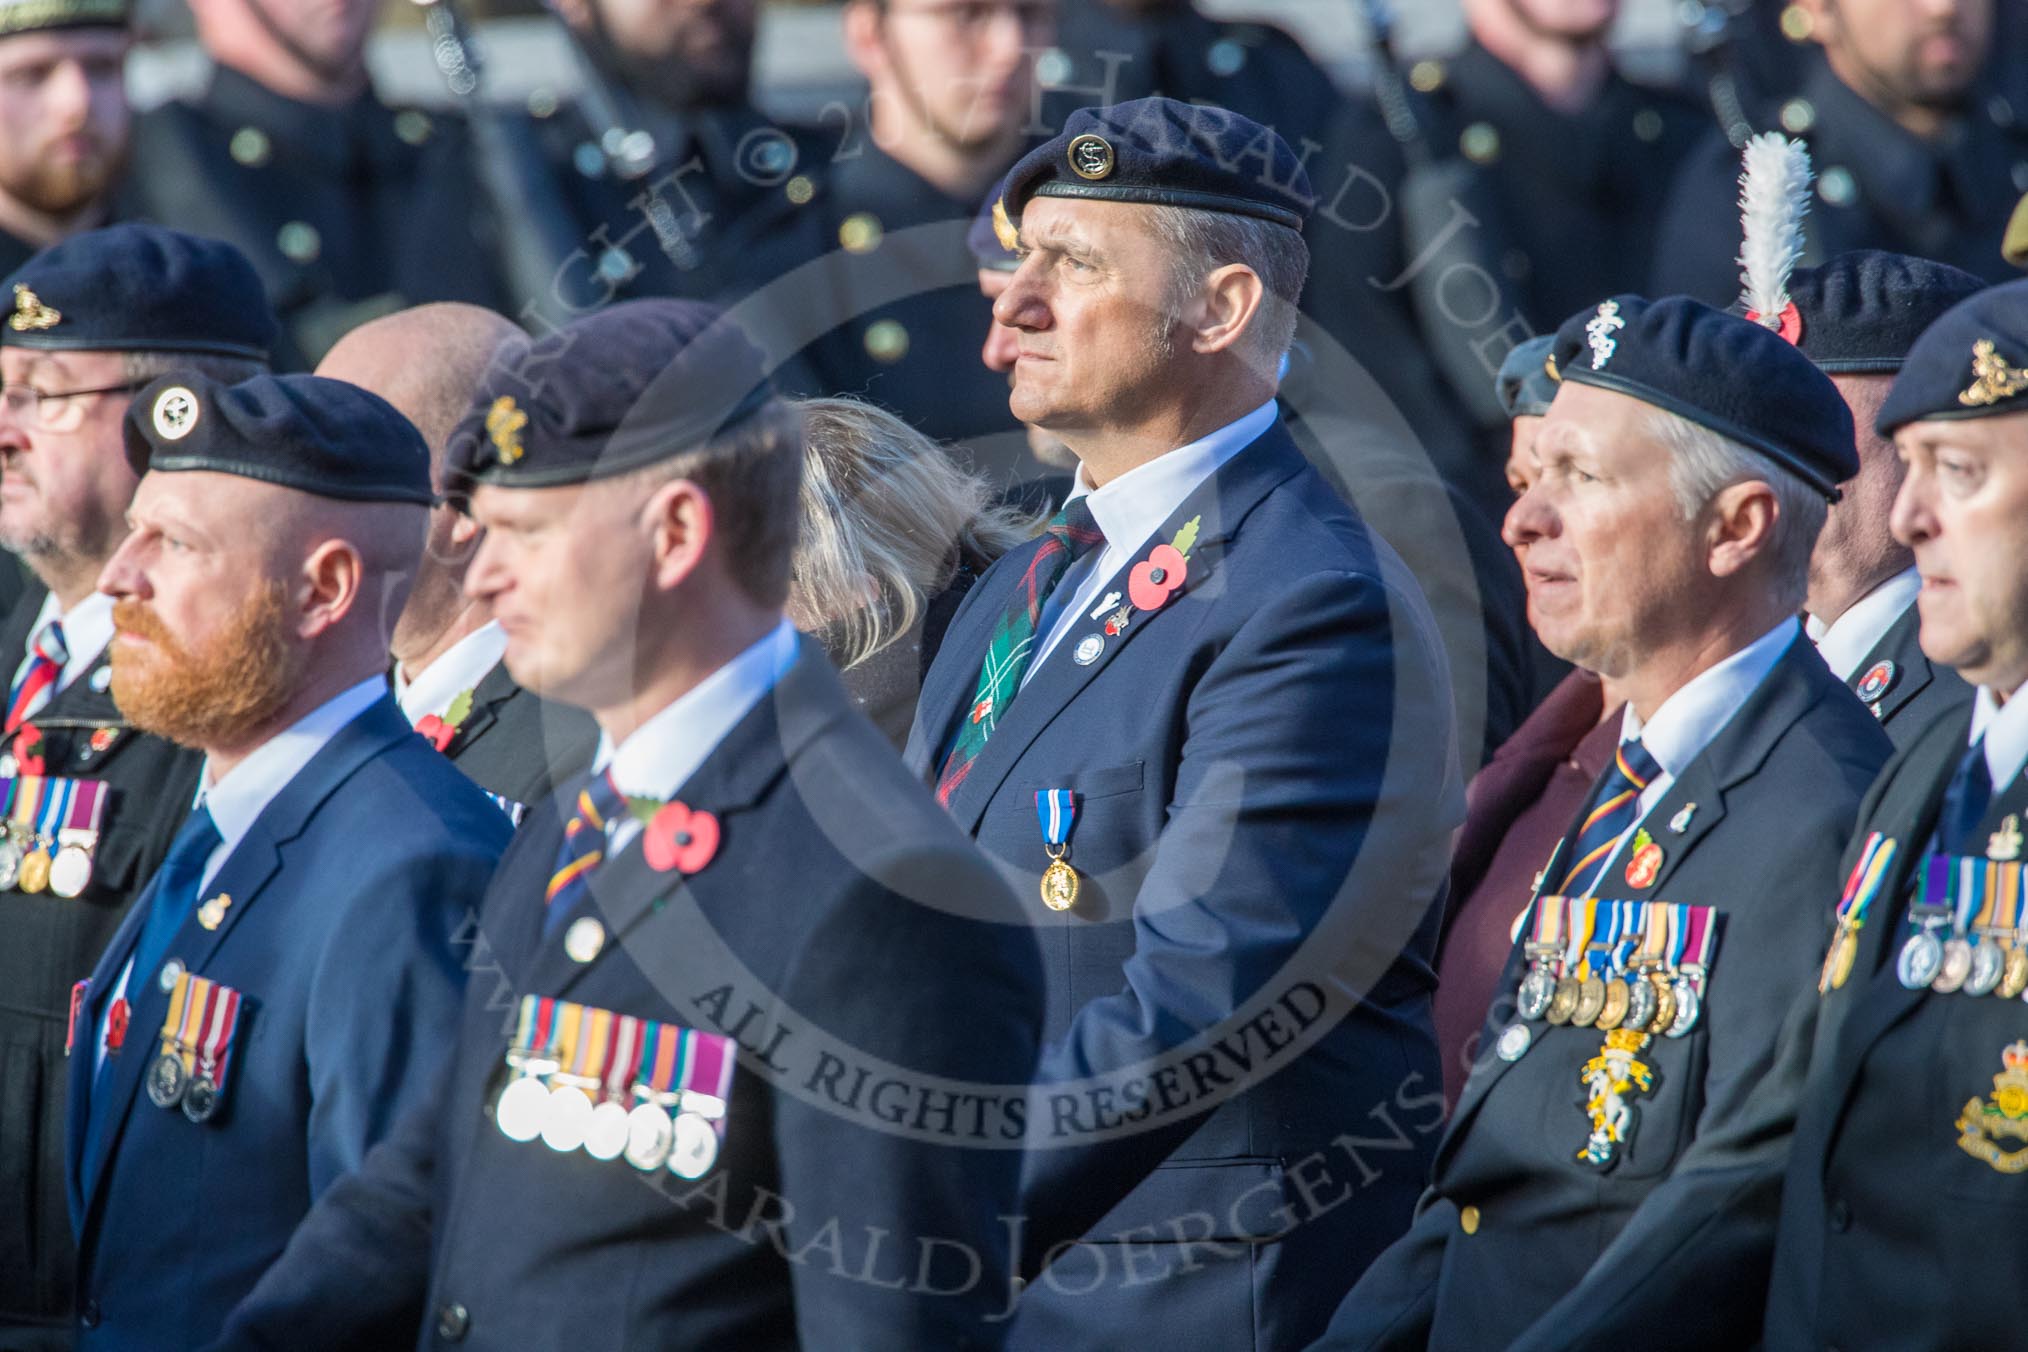 Help for Heroes (Group F4, 100 members) during the Royal British Legion March Past on Remembrance Sunday at the Cenotaph, Whitehall, Westminster, London, 11 November 2018, 11:50.